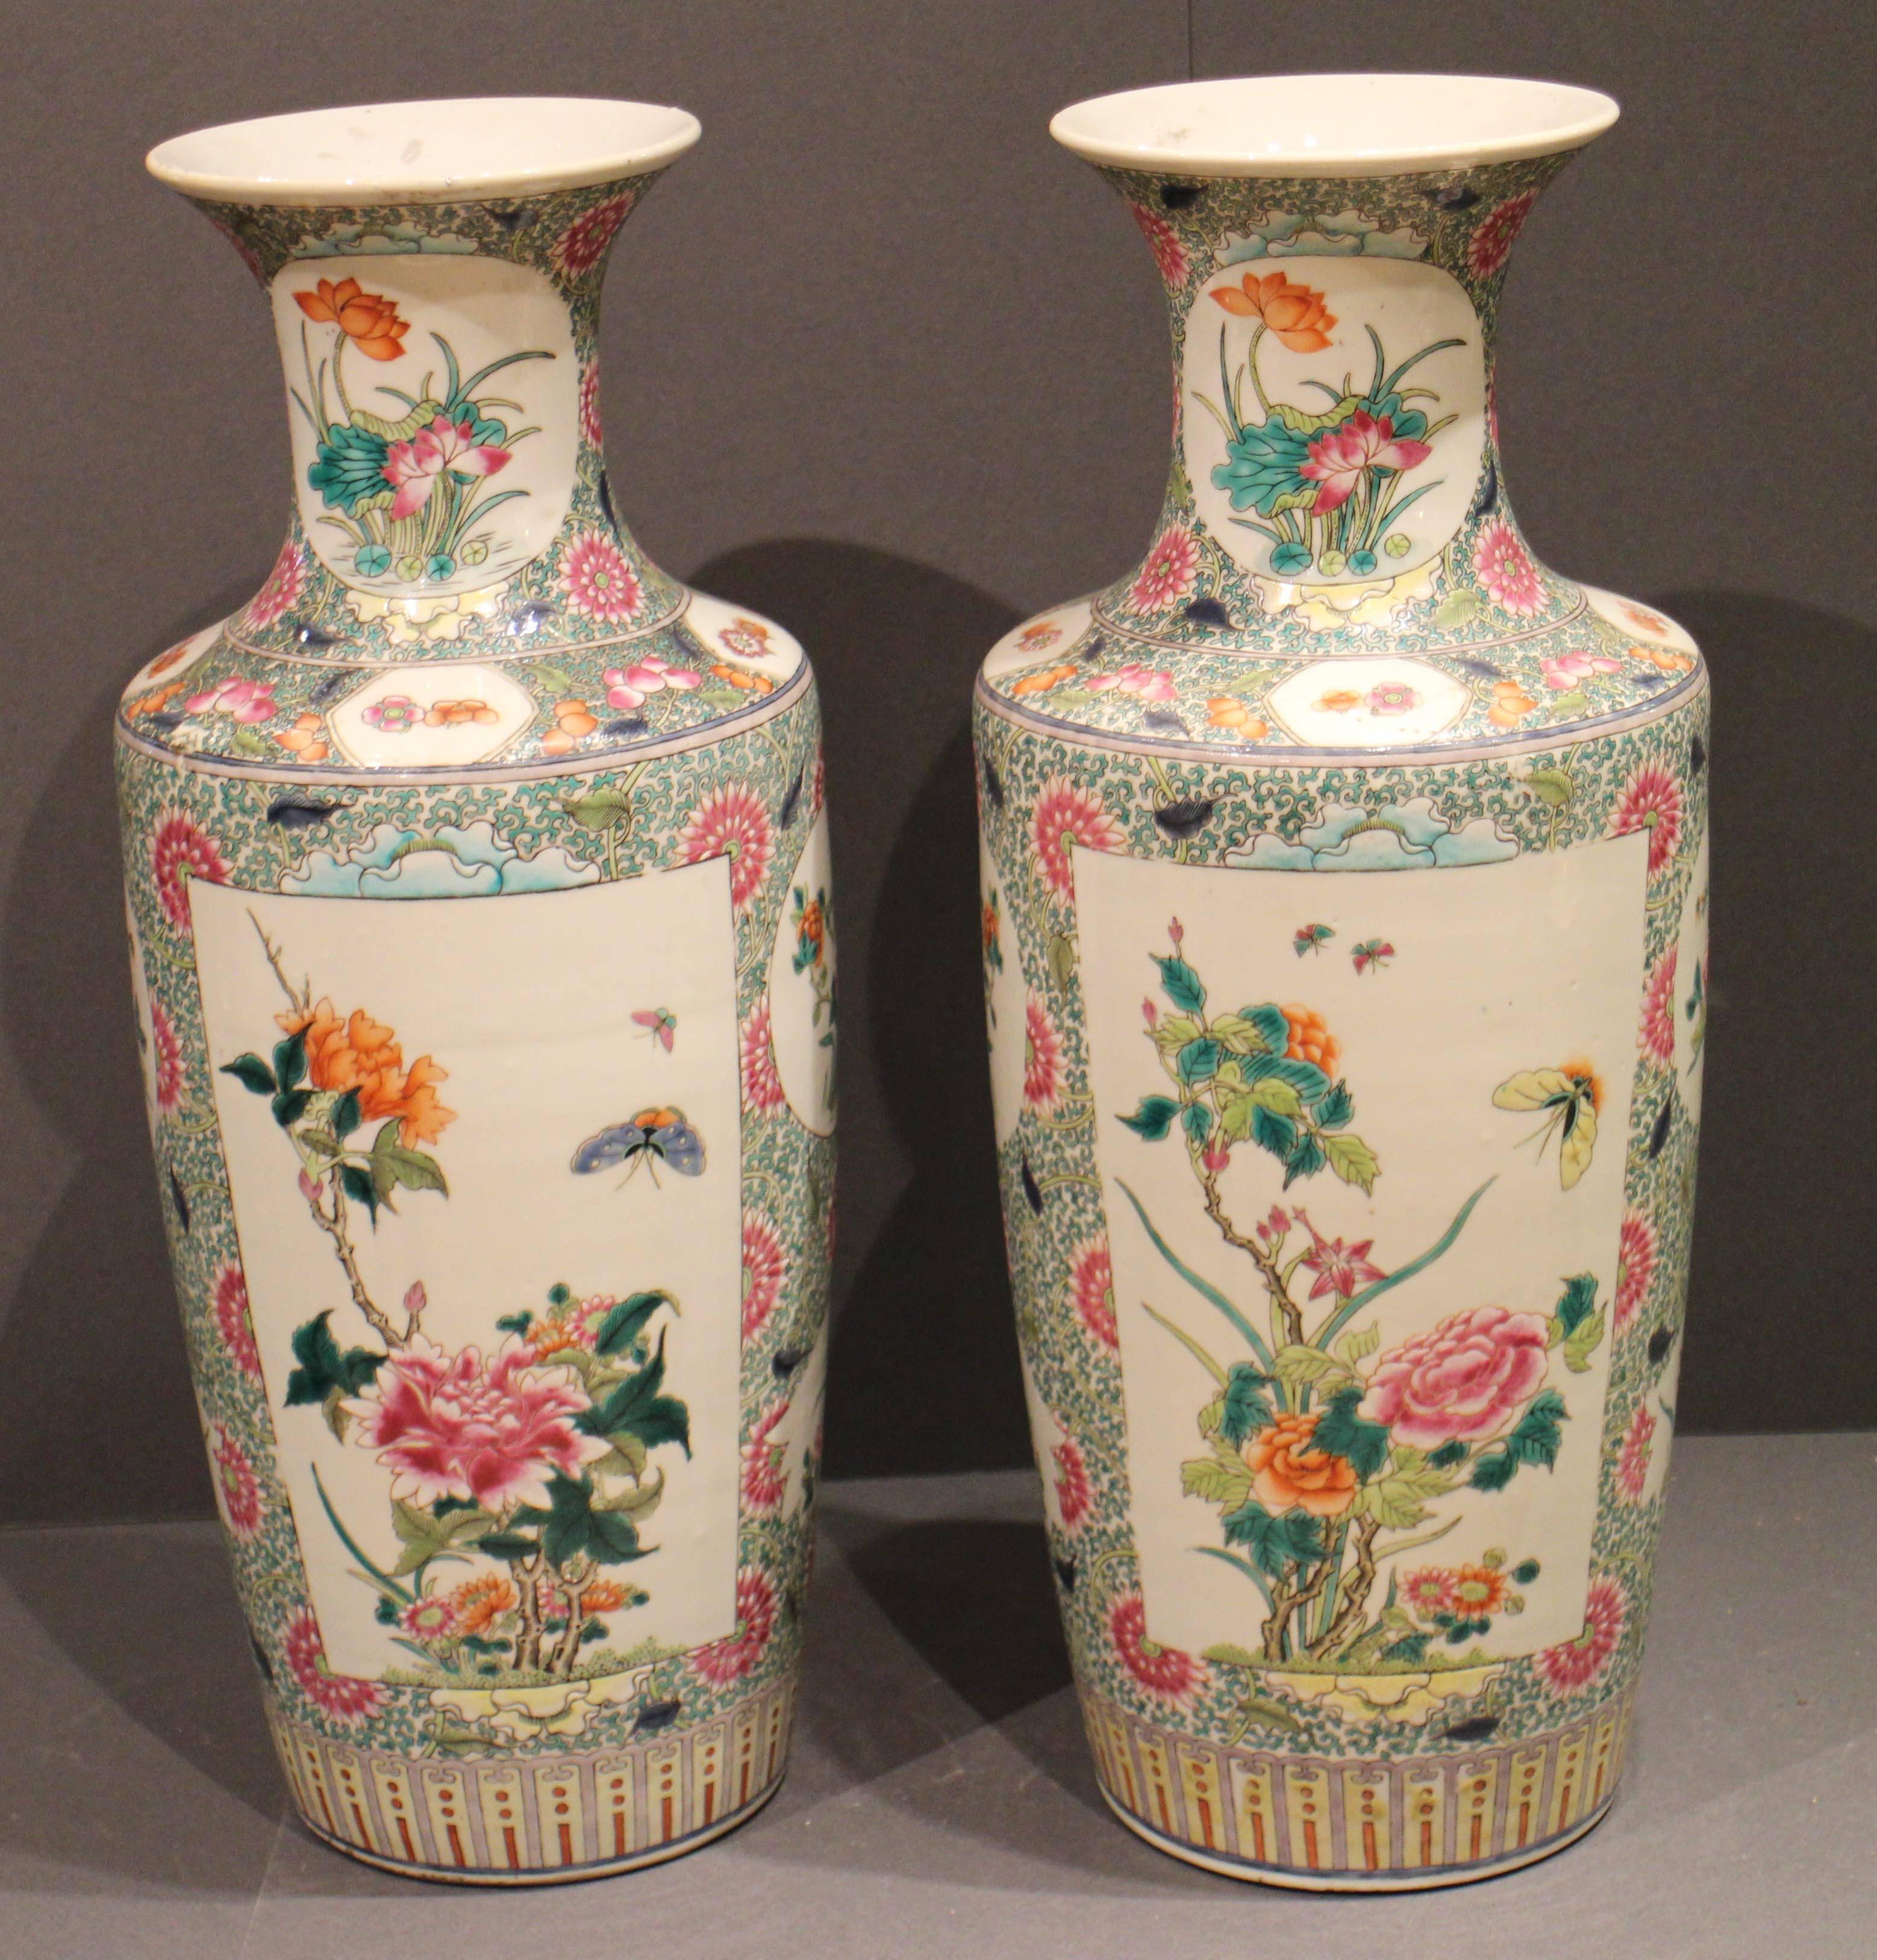 A fine pair of antique Chinese famille verte vases decorated with finely painted panels of butterflies and flowers on a green and pink floral ground.